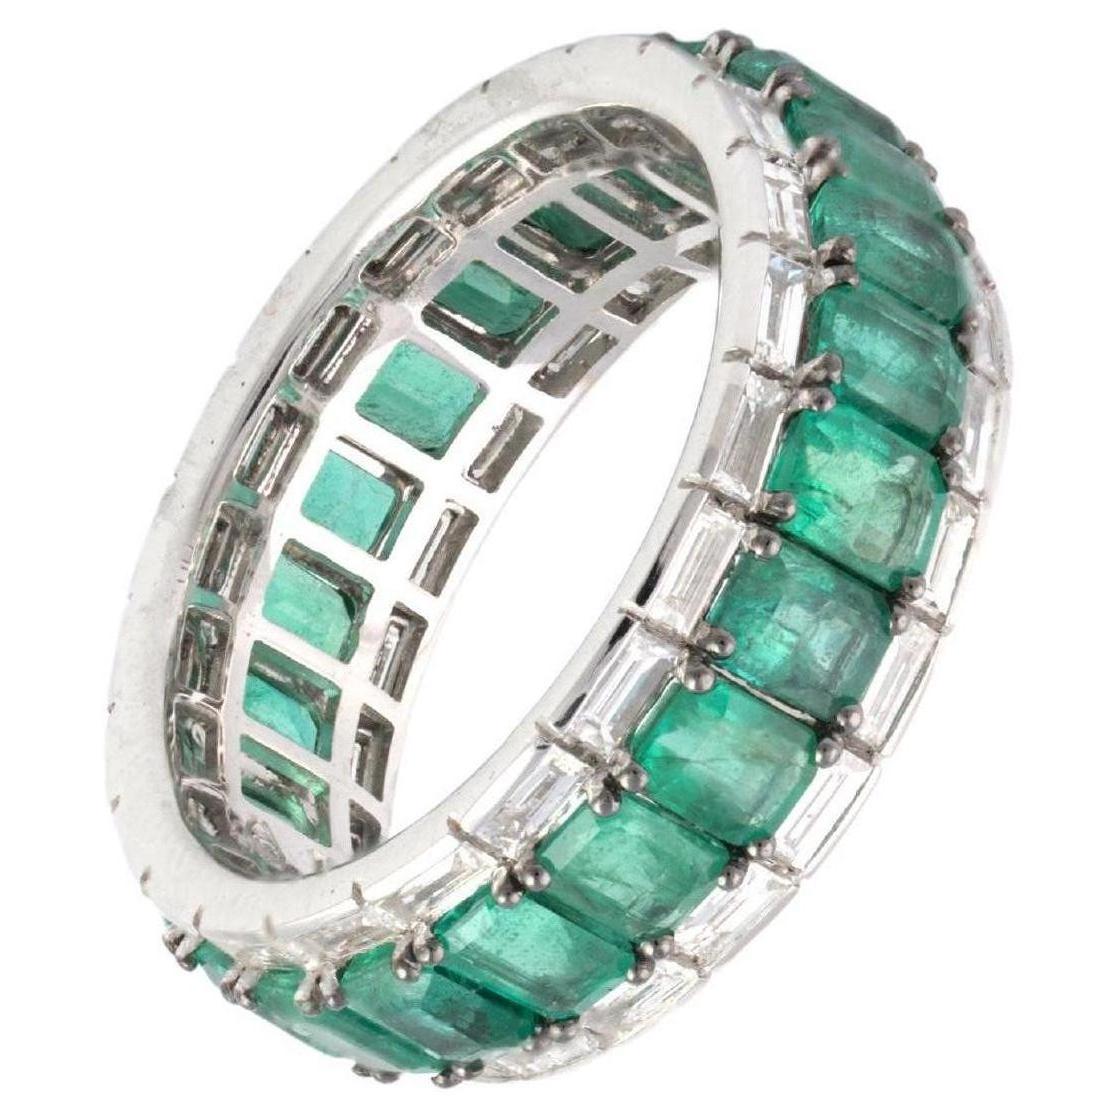 Natural Diamond 1.26cts & Emerald 4.91cts in 18k Gold 4.73gms Ring